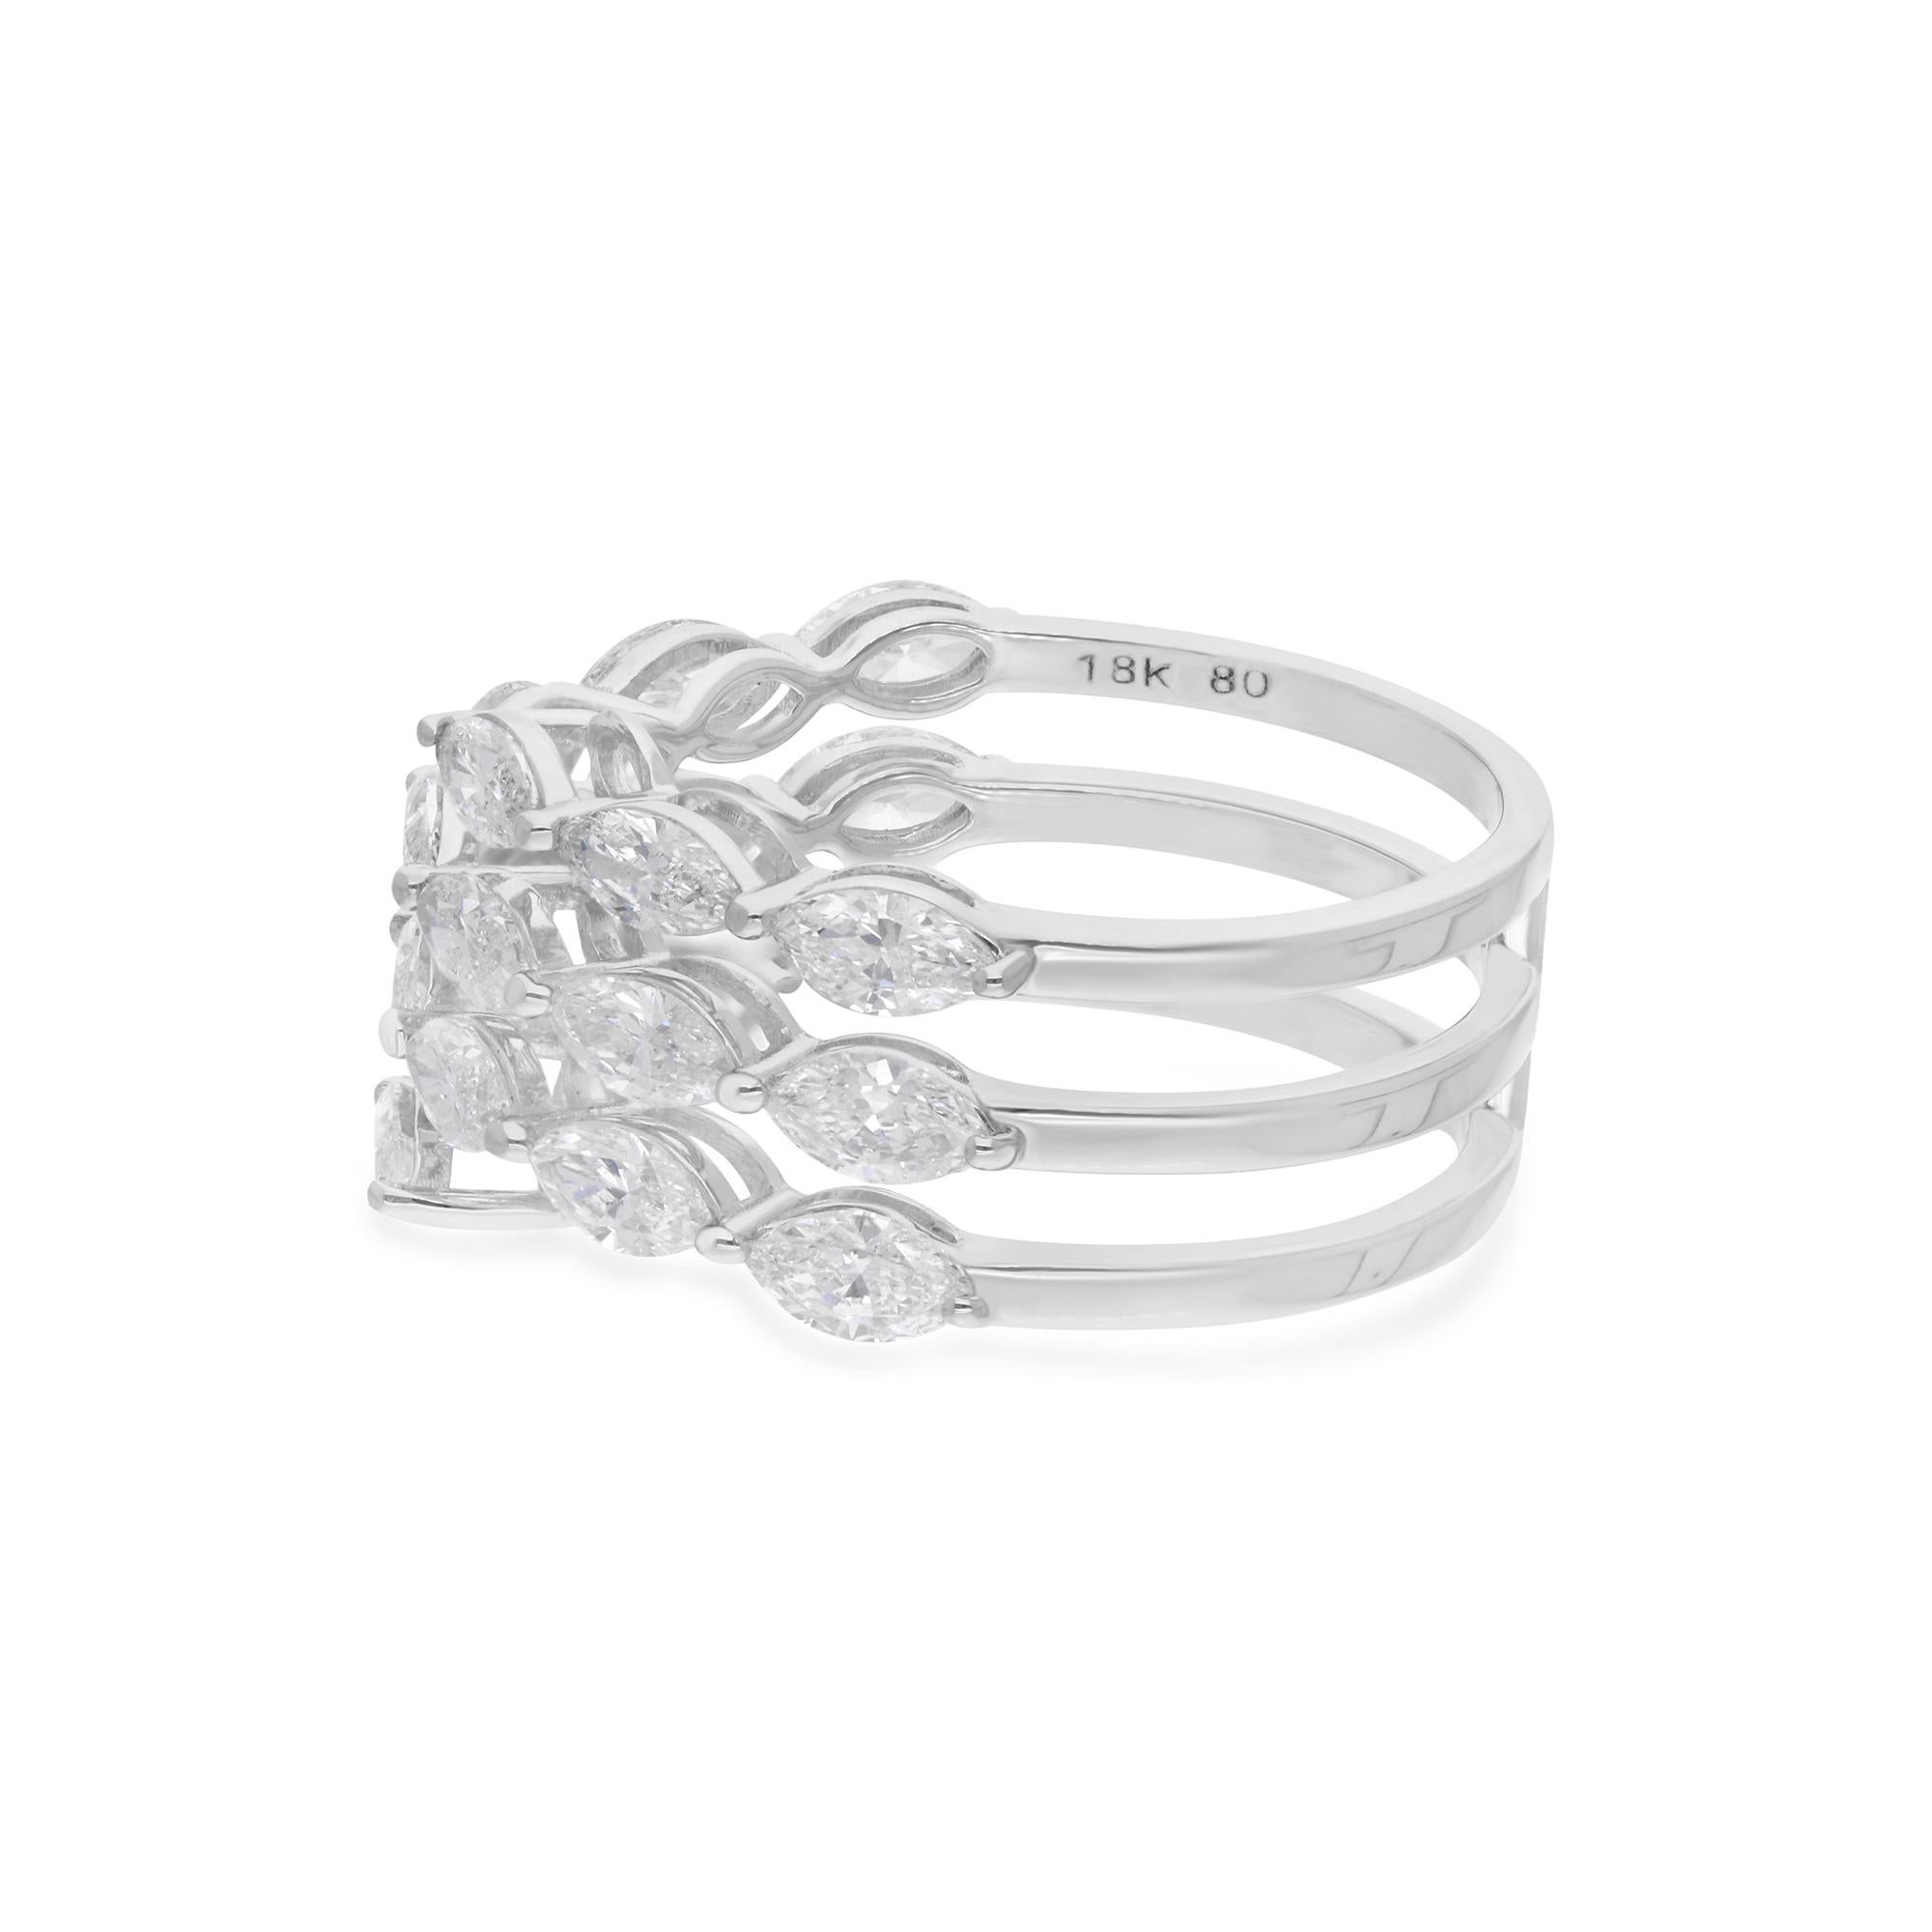 Set in a delicate 18 Karat White Gold band, this ring exudes purity and elegance, mirroring the pristine beauty of nature in full bloom. The lustrous white gold setting provides the perfect backdrop for the dazzling diamond, creating a mesmerizing